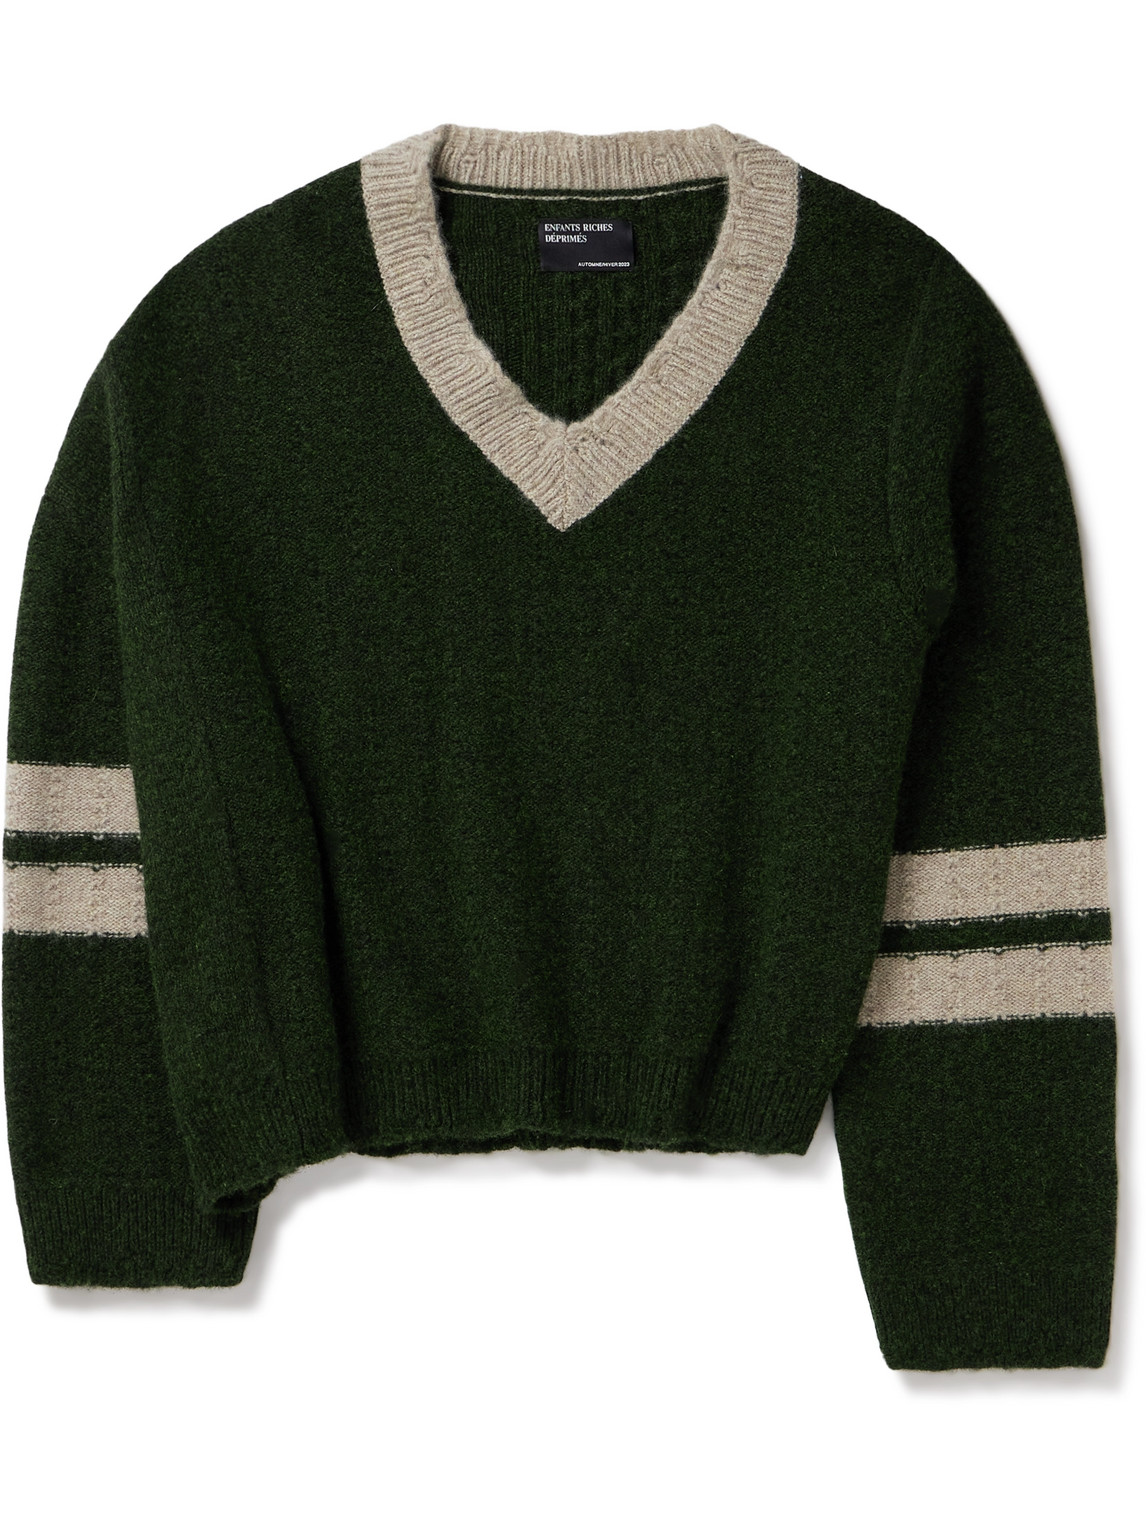 Enfants Riches Deprimes Asymmetric Striped Brushed-cashmere Sweater In Green